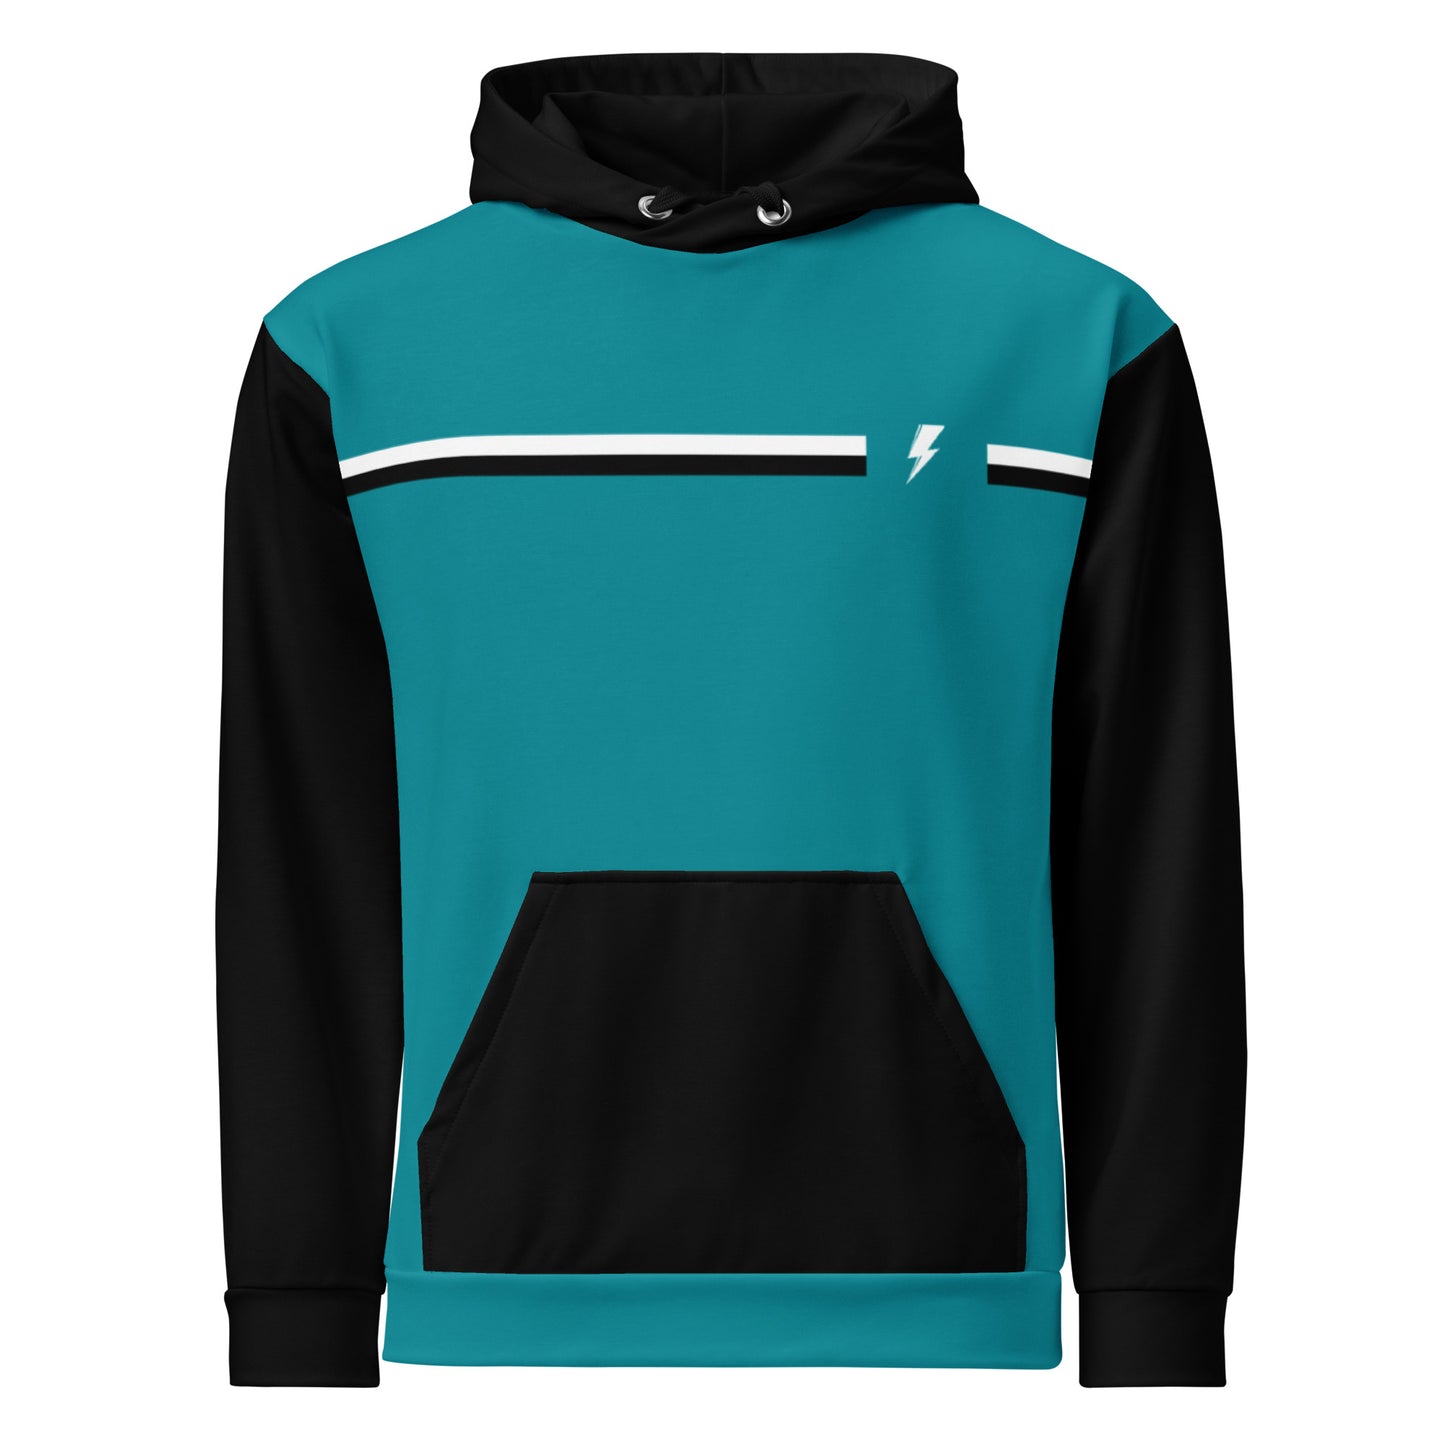 SVOLTA Stripes and Bolts Unisex Color Block Hoodie in Black & Teal, XS-XL - Teen to Adult